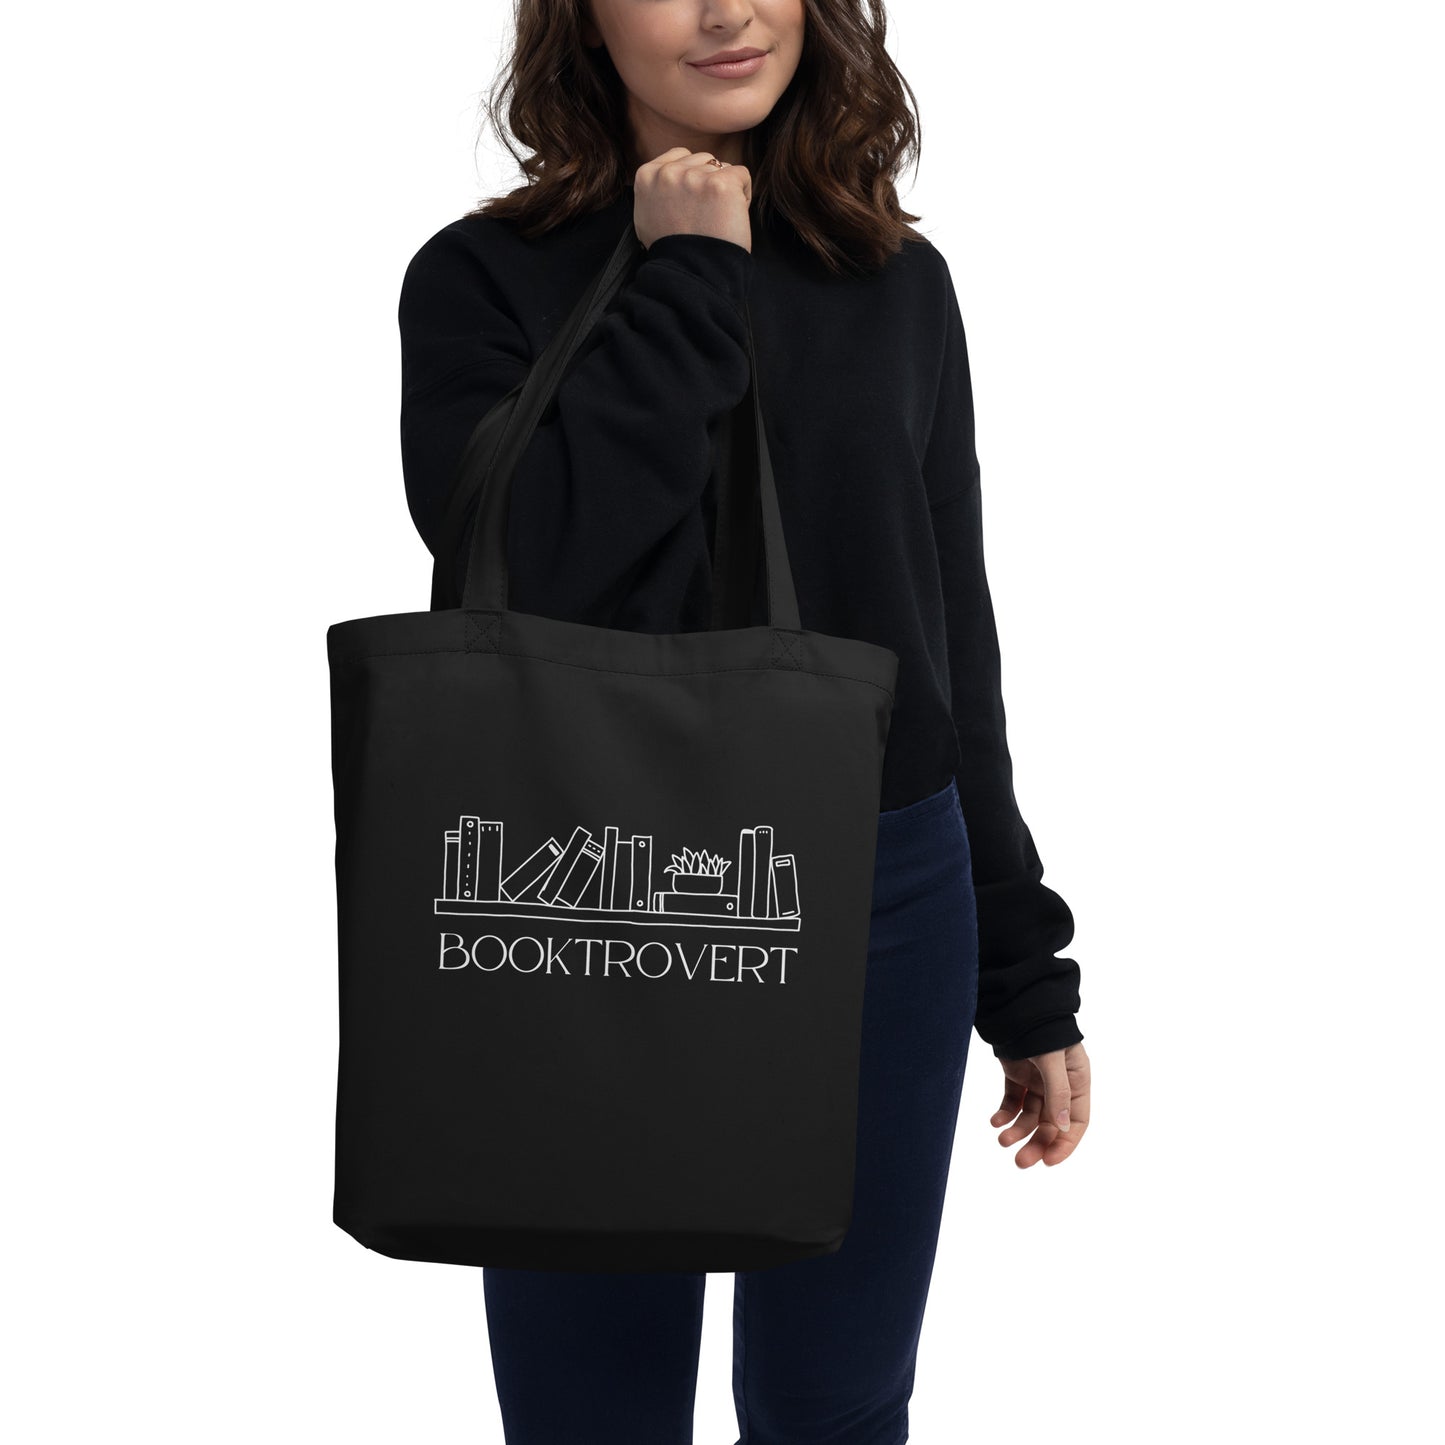 woman hold black tote that says Booktrovert